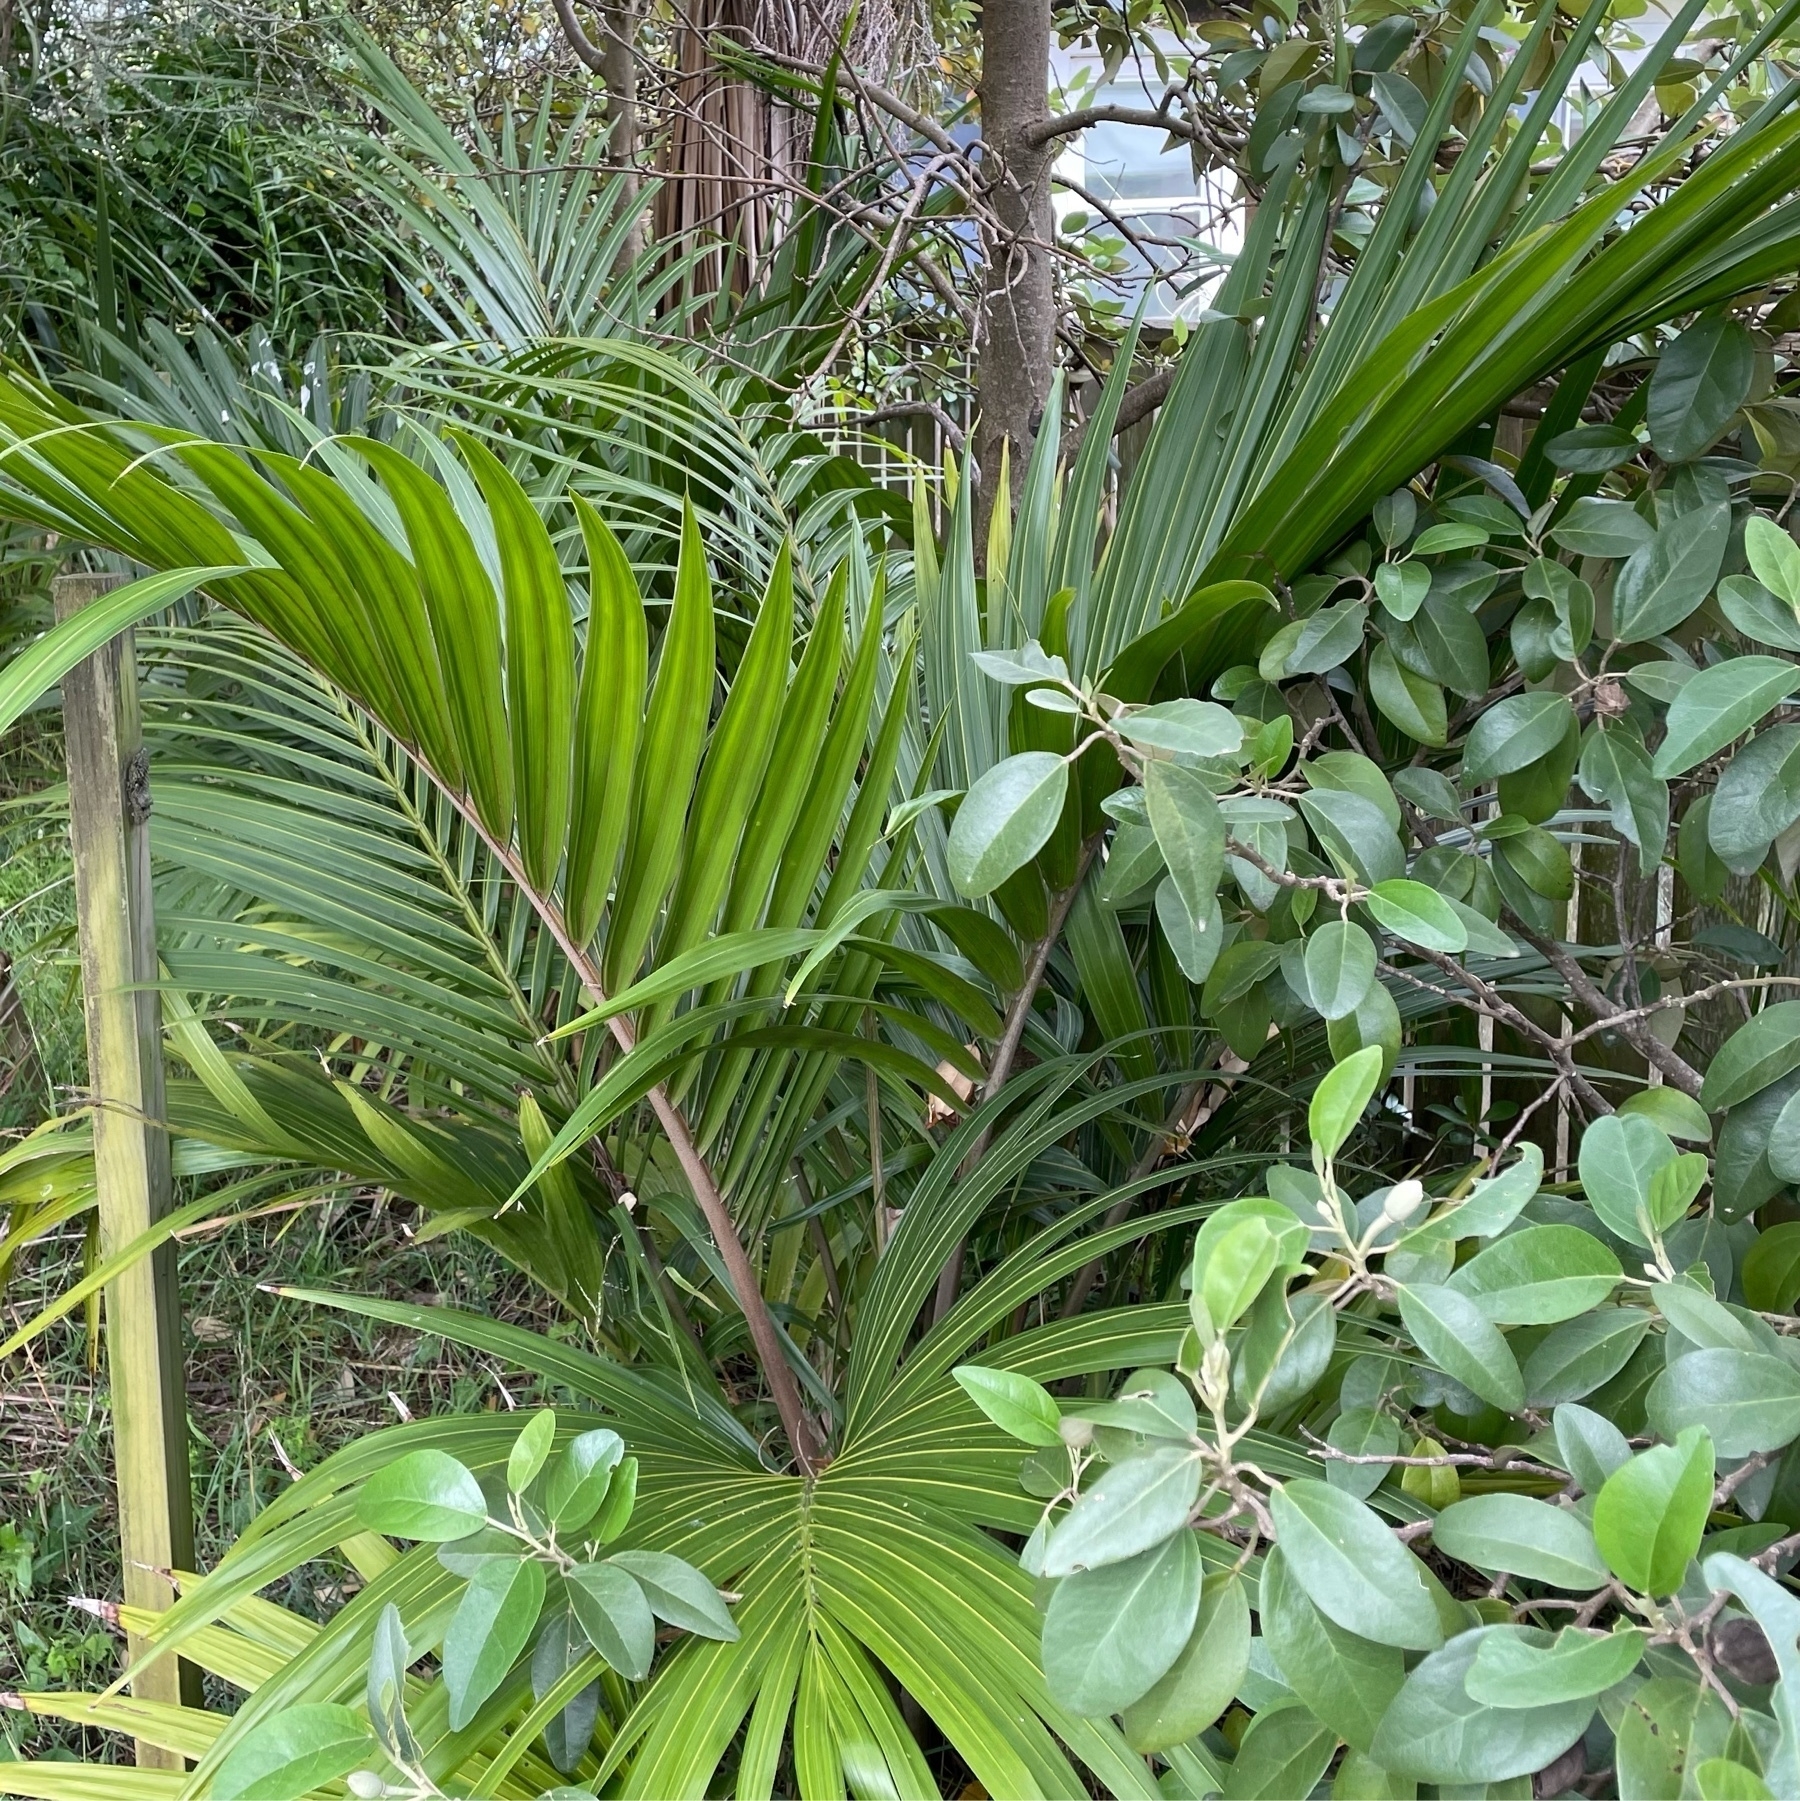 Nikau palms and other undergrowth 